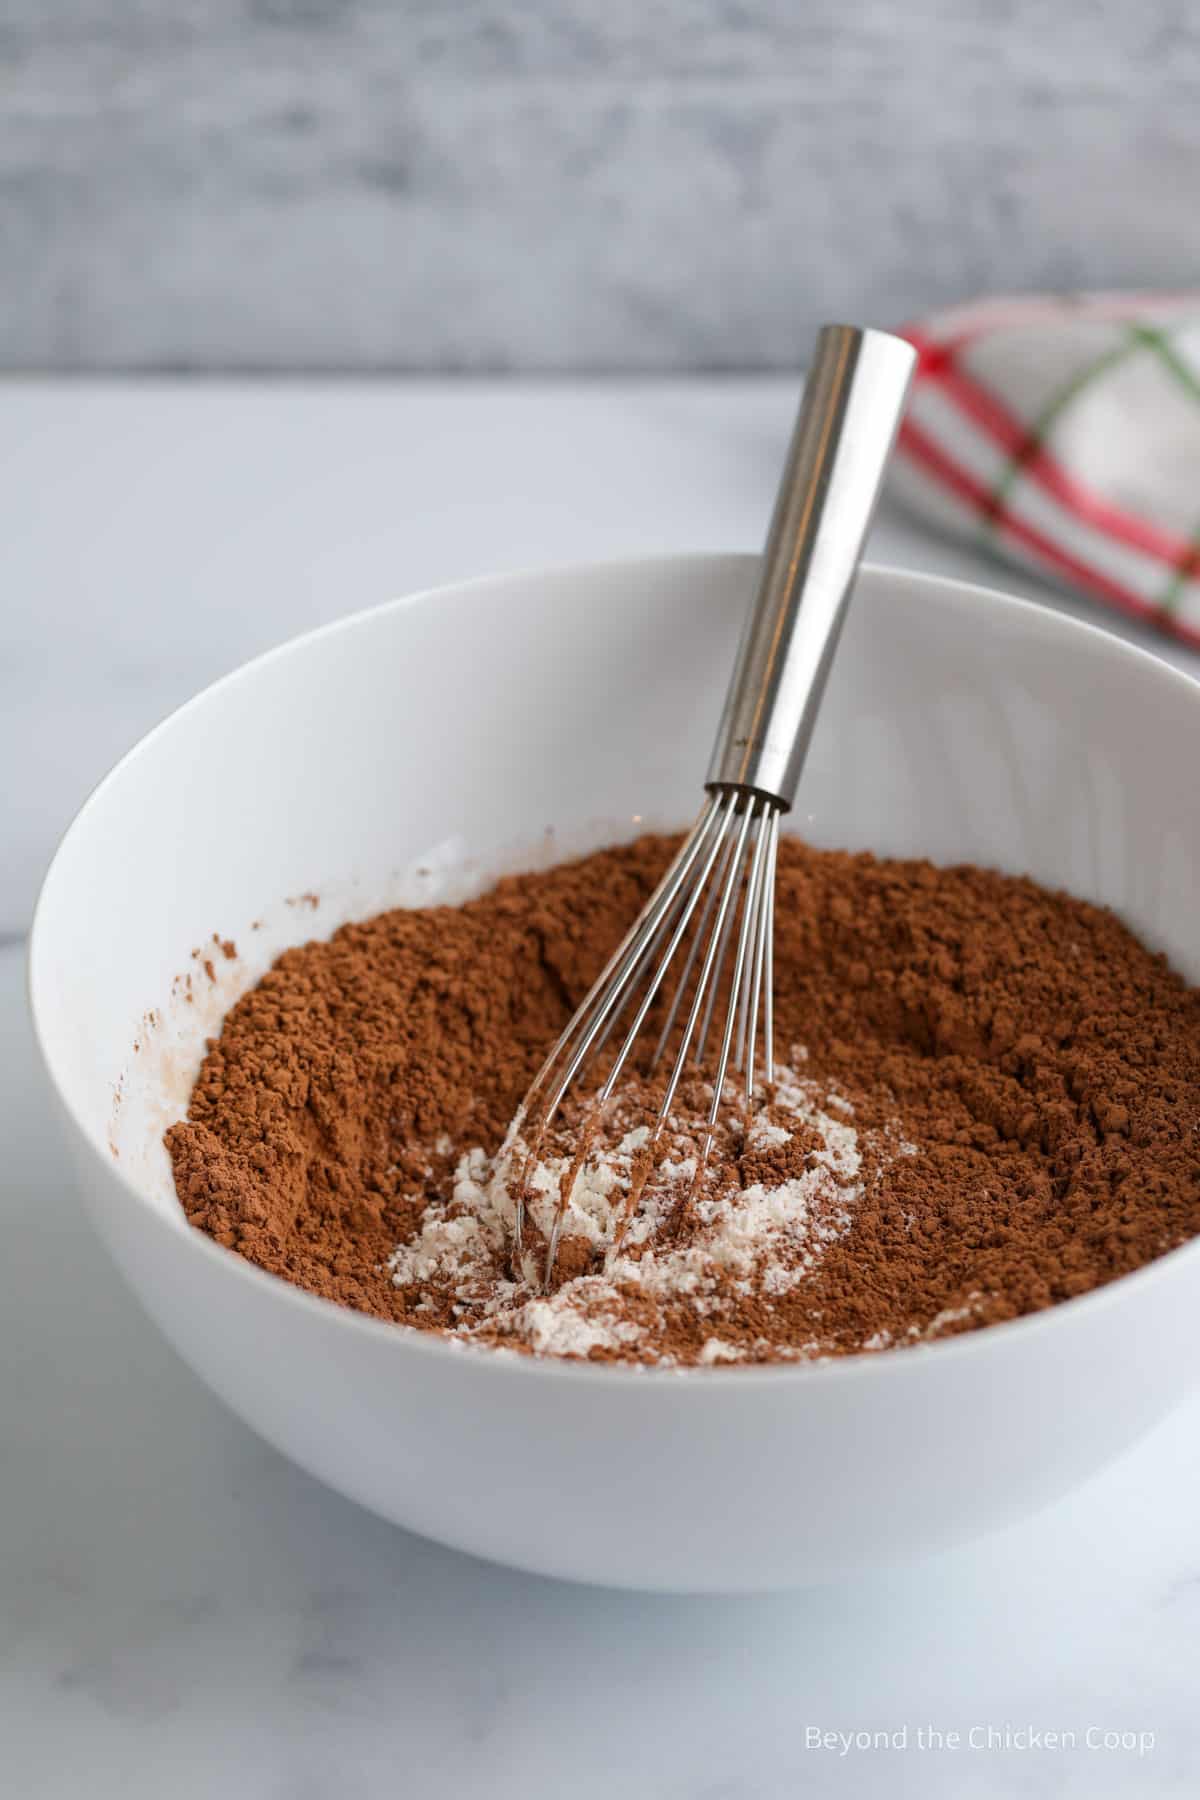 Mixing cocoa powder into a bowl of flour with a whisk.